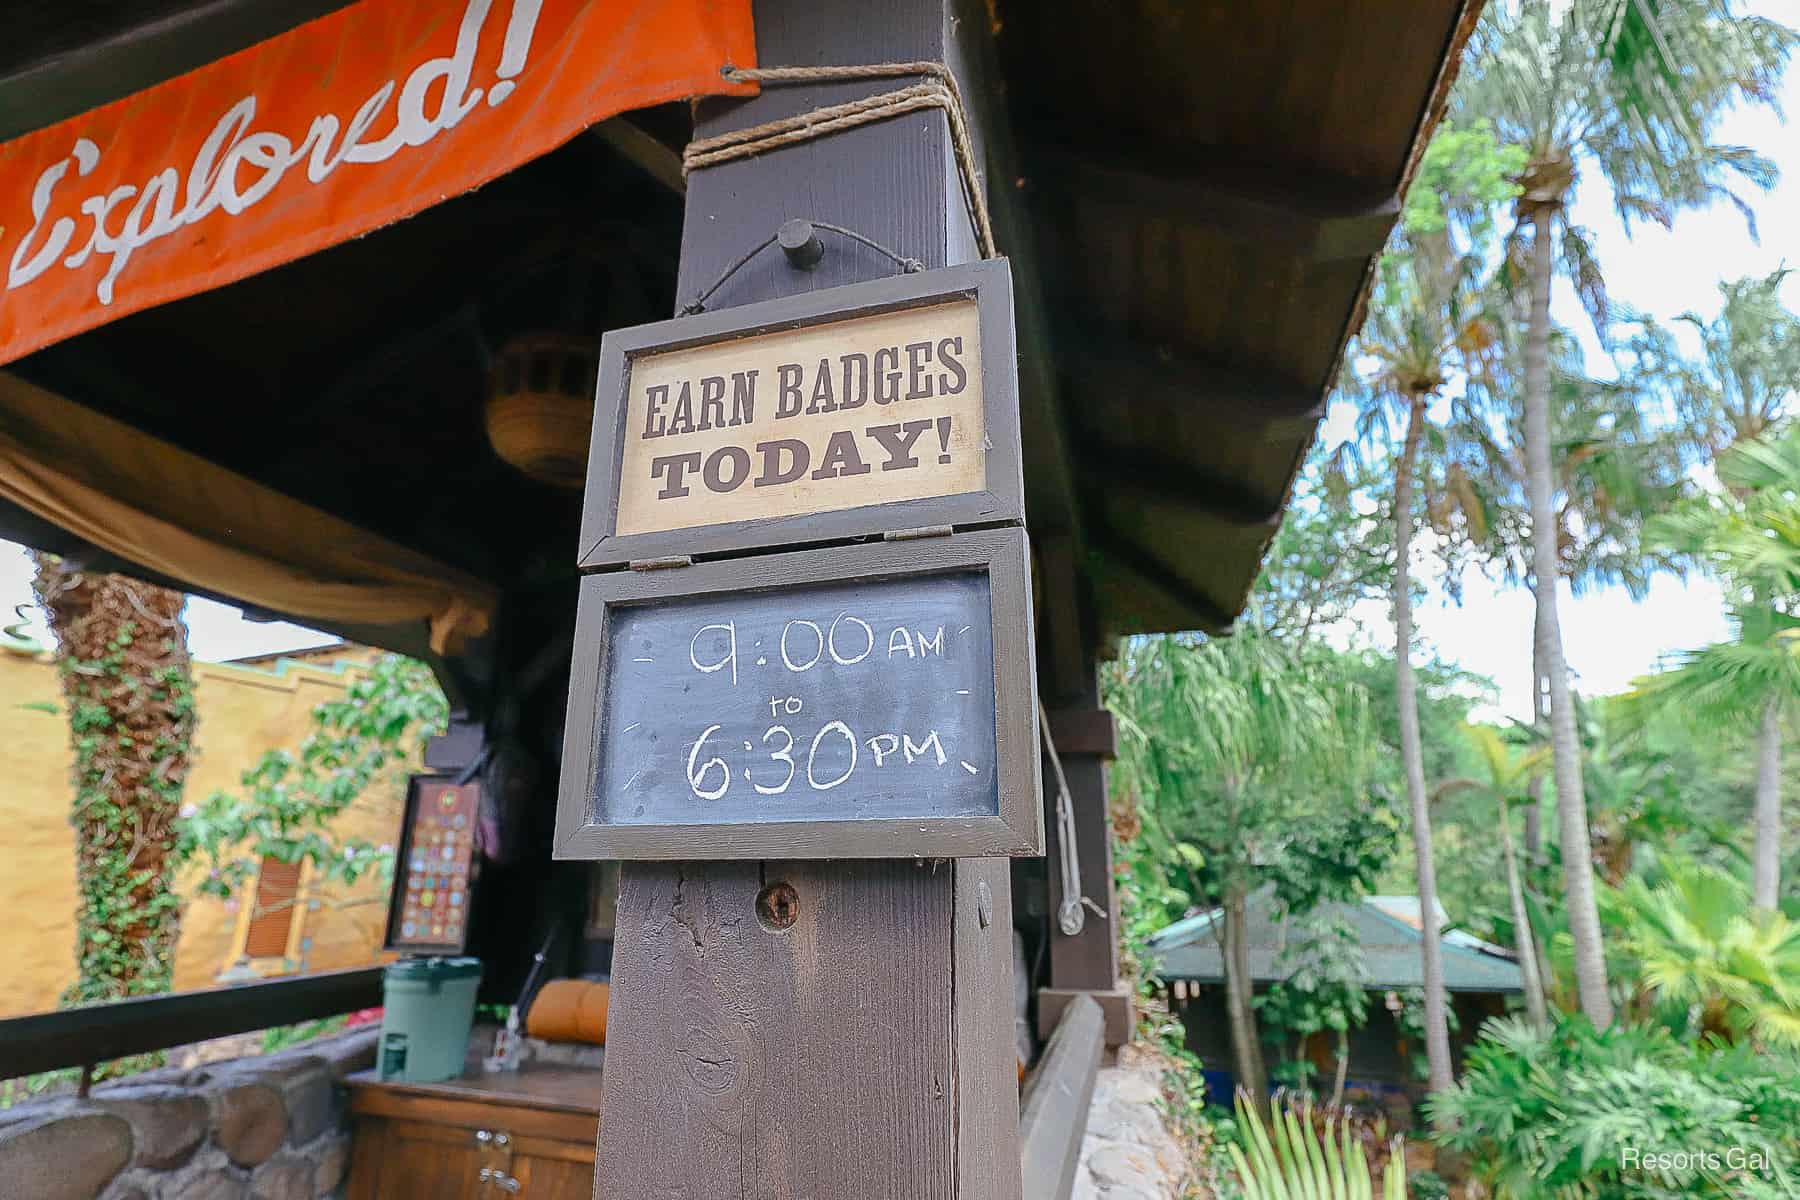 posted hours for the Wilderness Explorer's program 